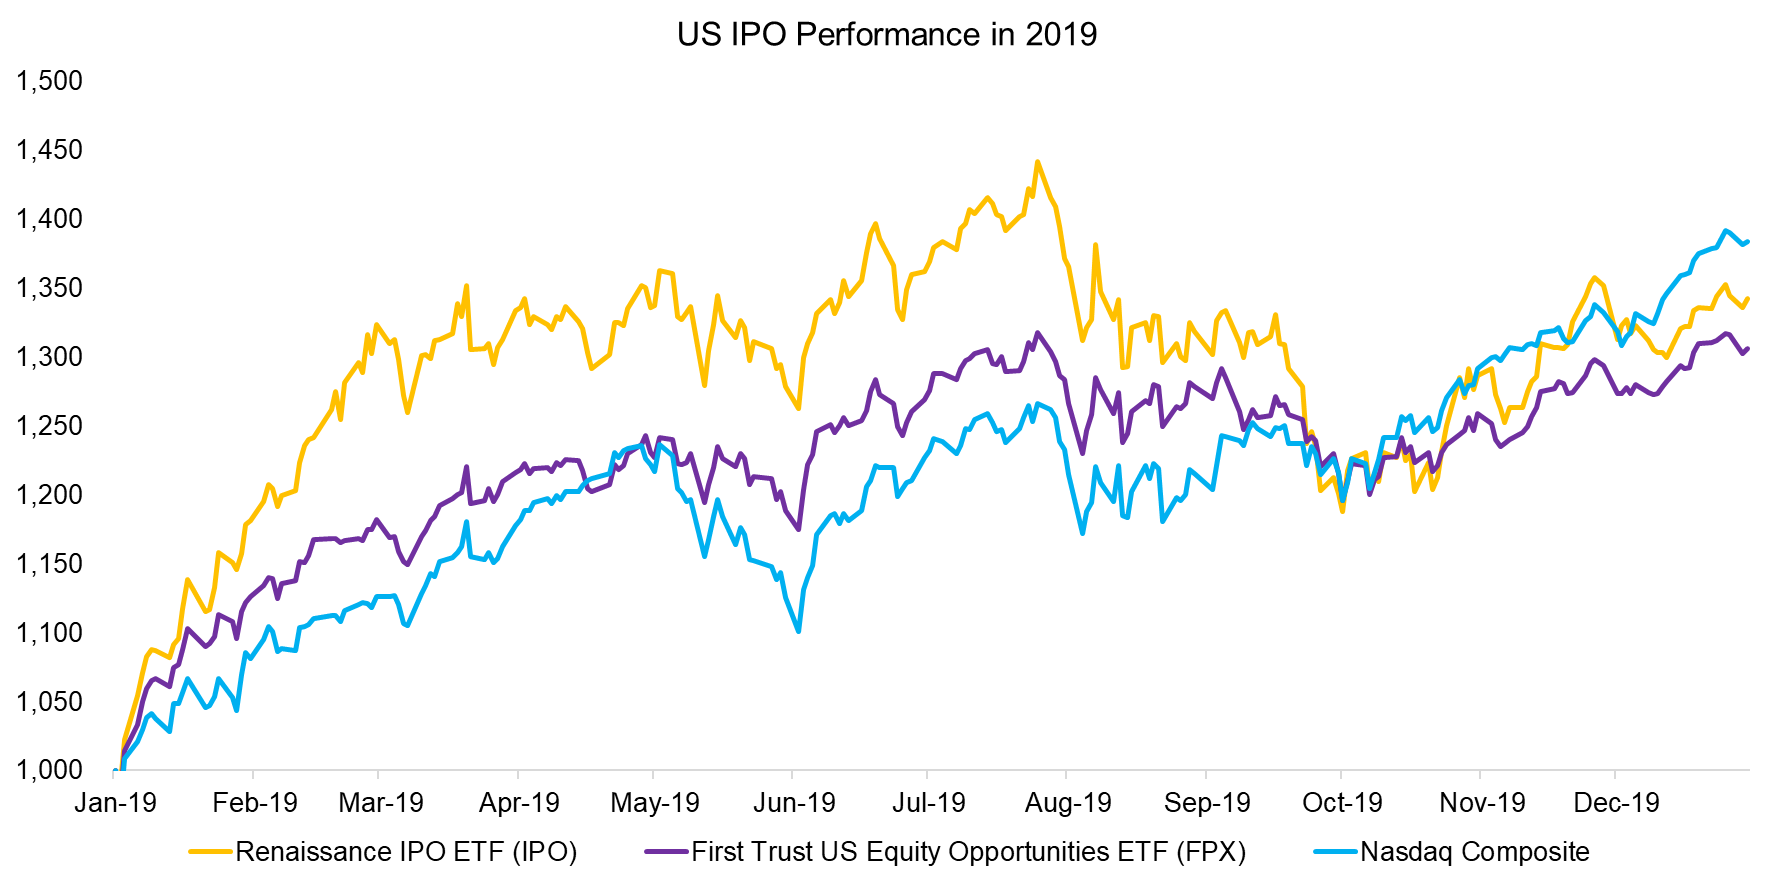 US IPO Performance in 2019